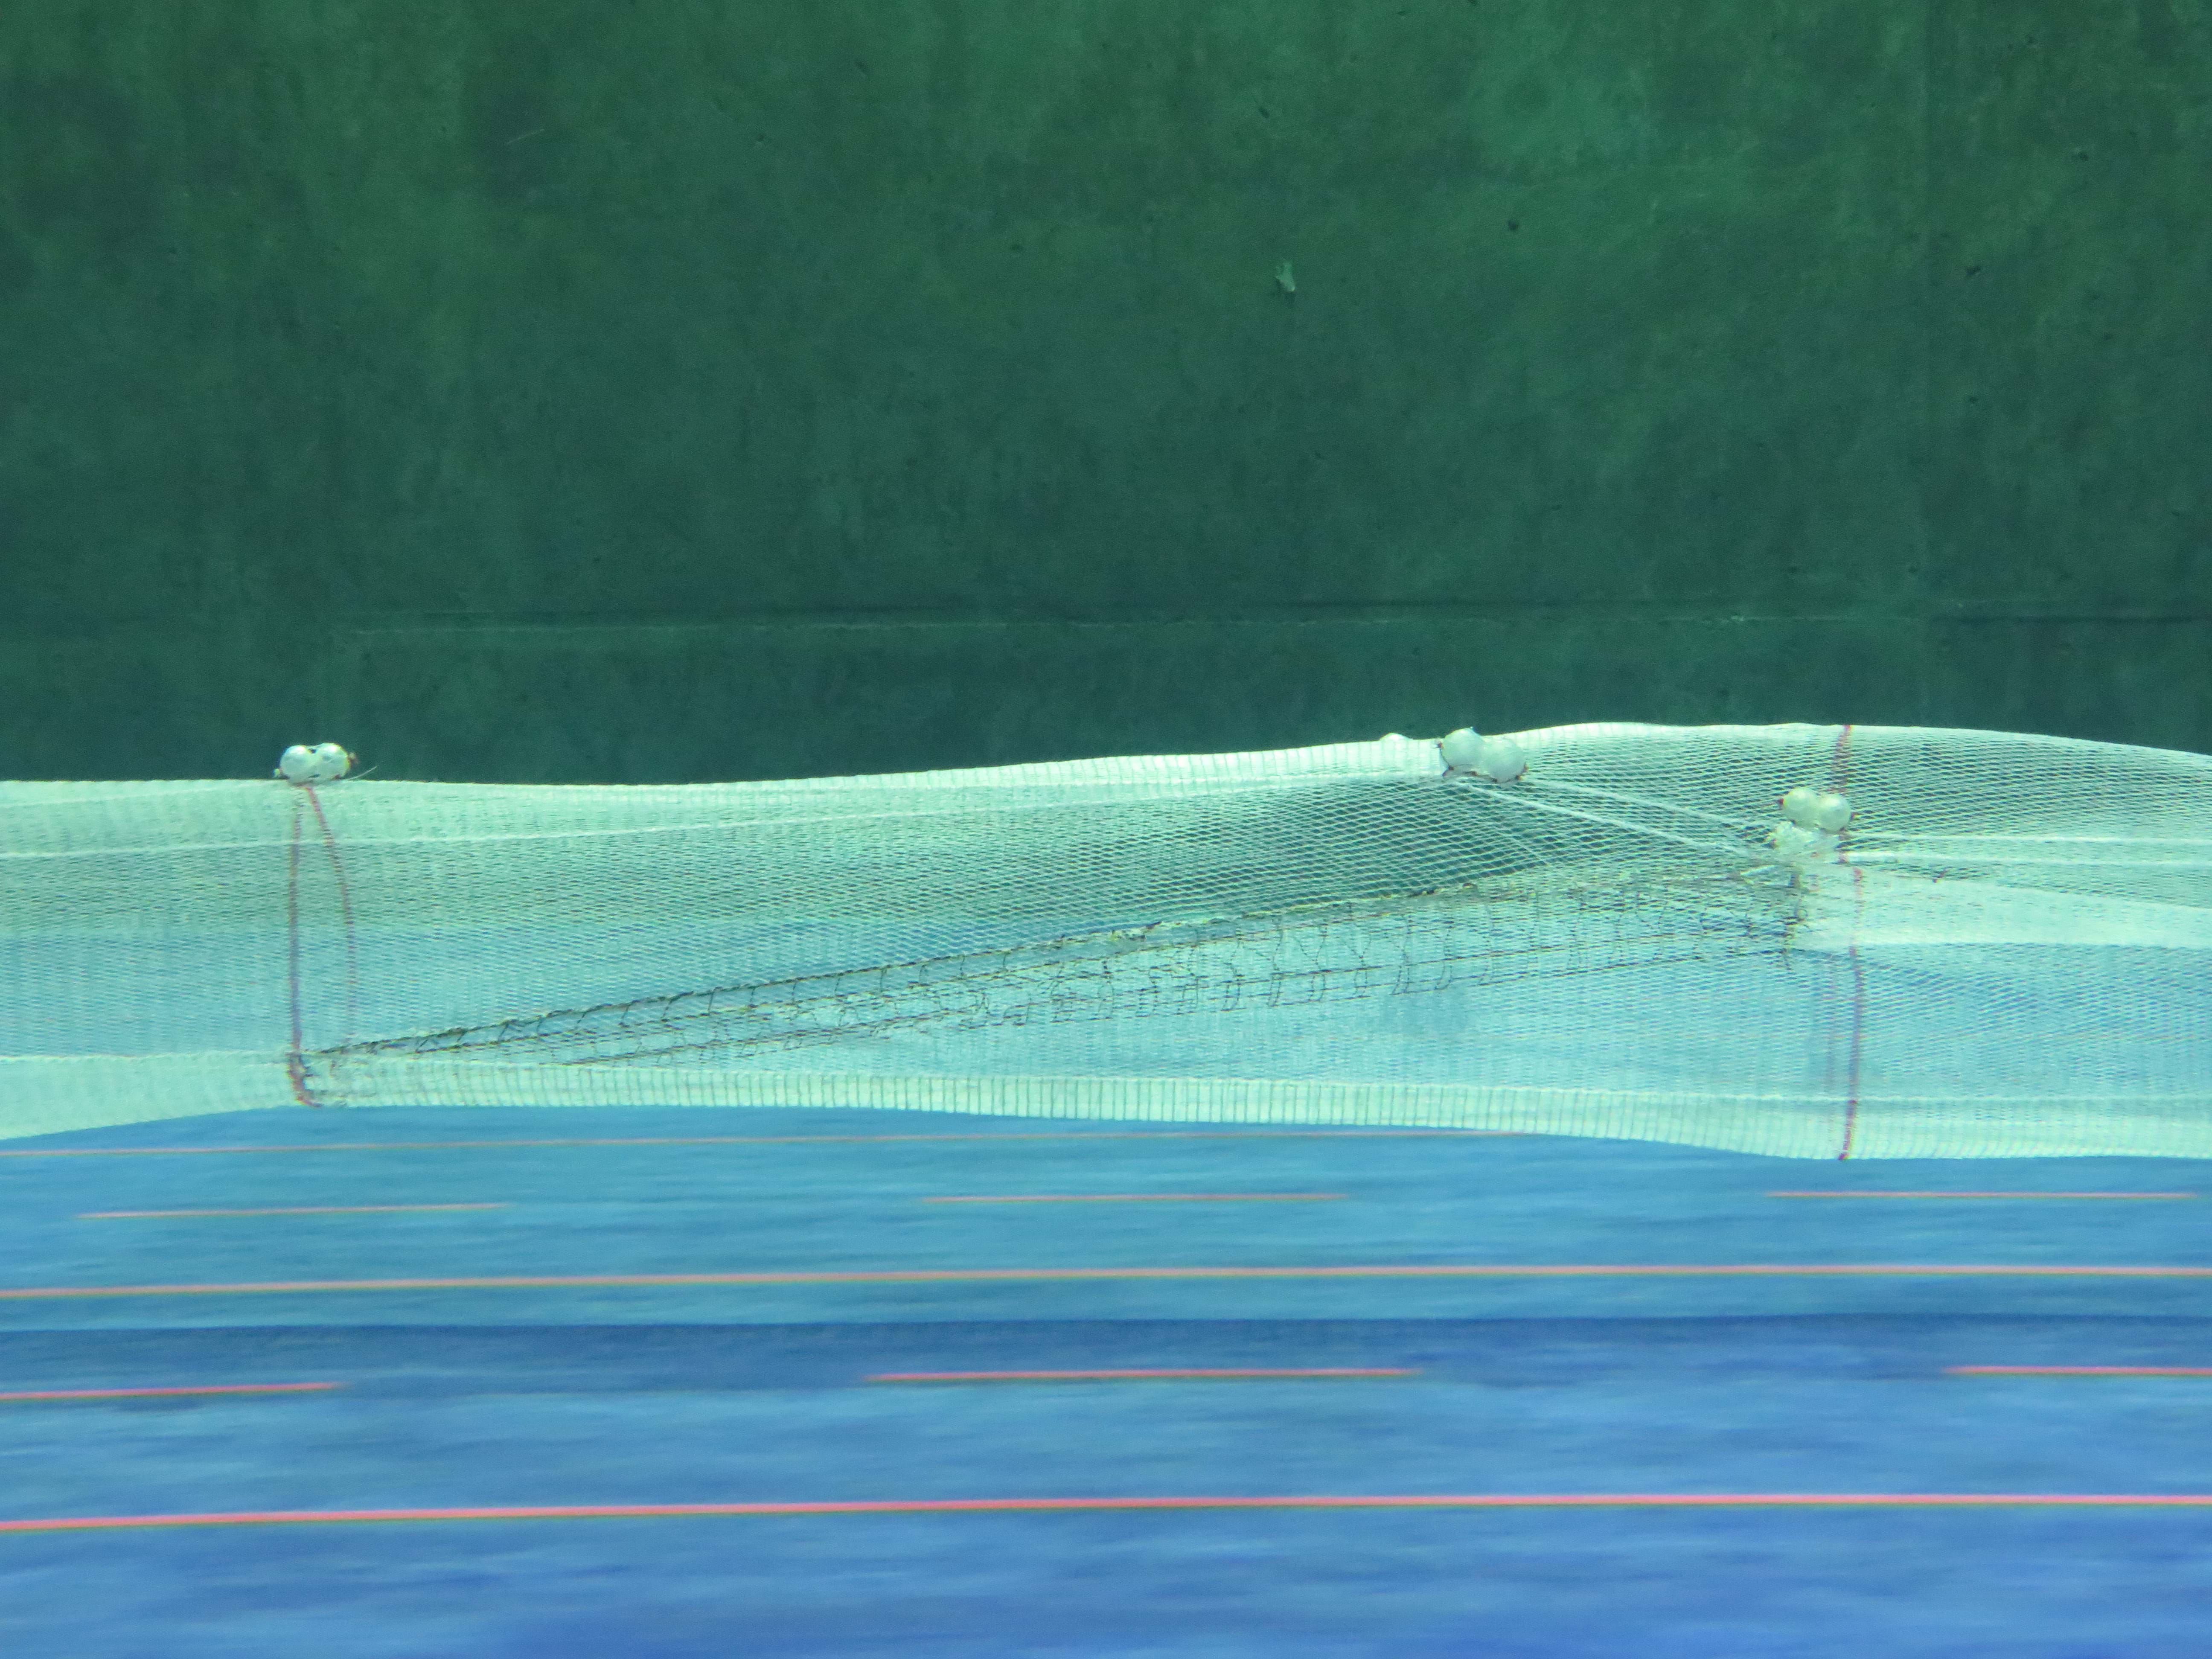 A side view of an Amity Net Grid in a flume tank, showing two 8 inch floats on each selvedge